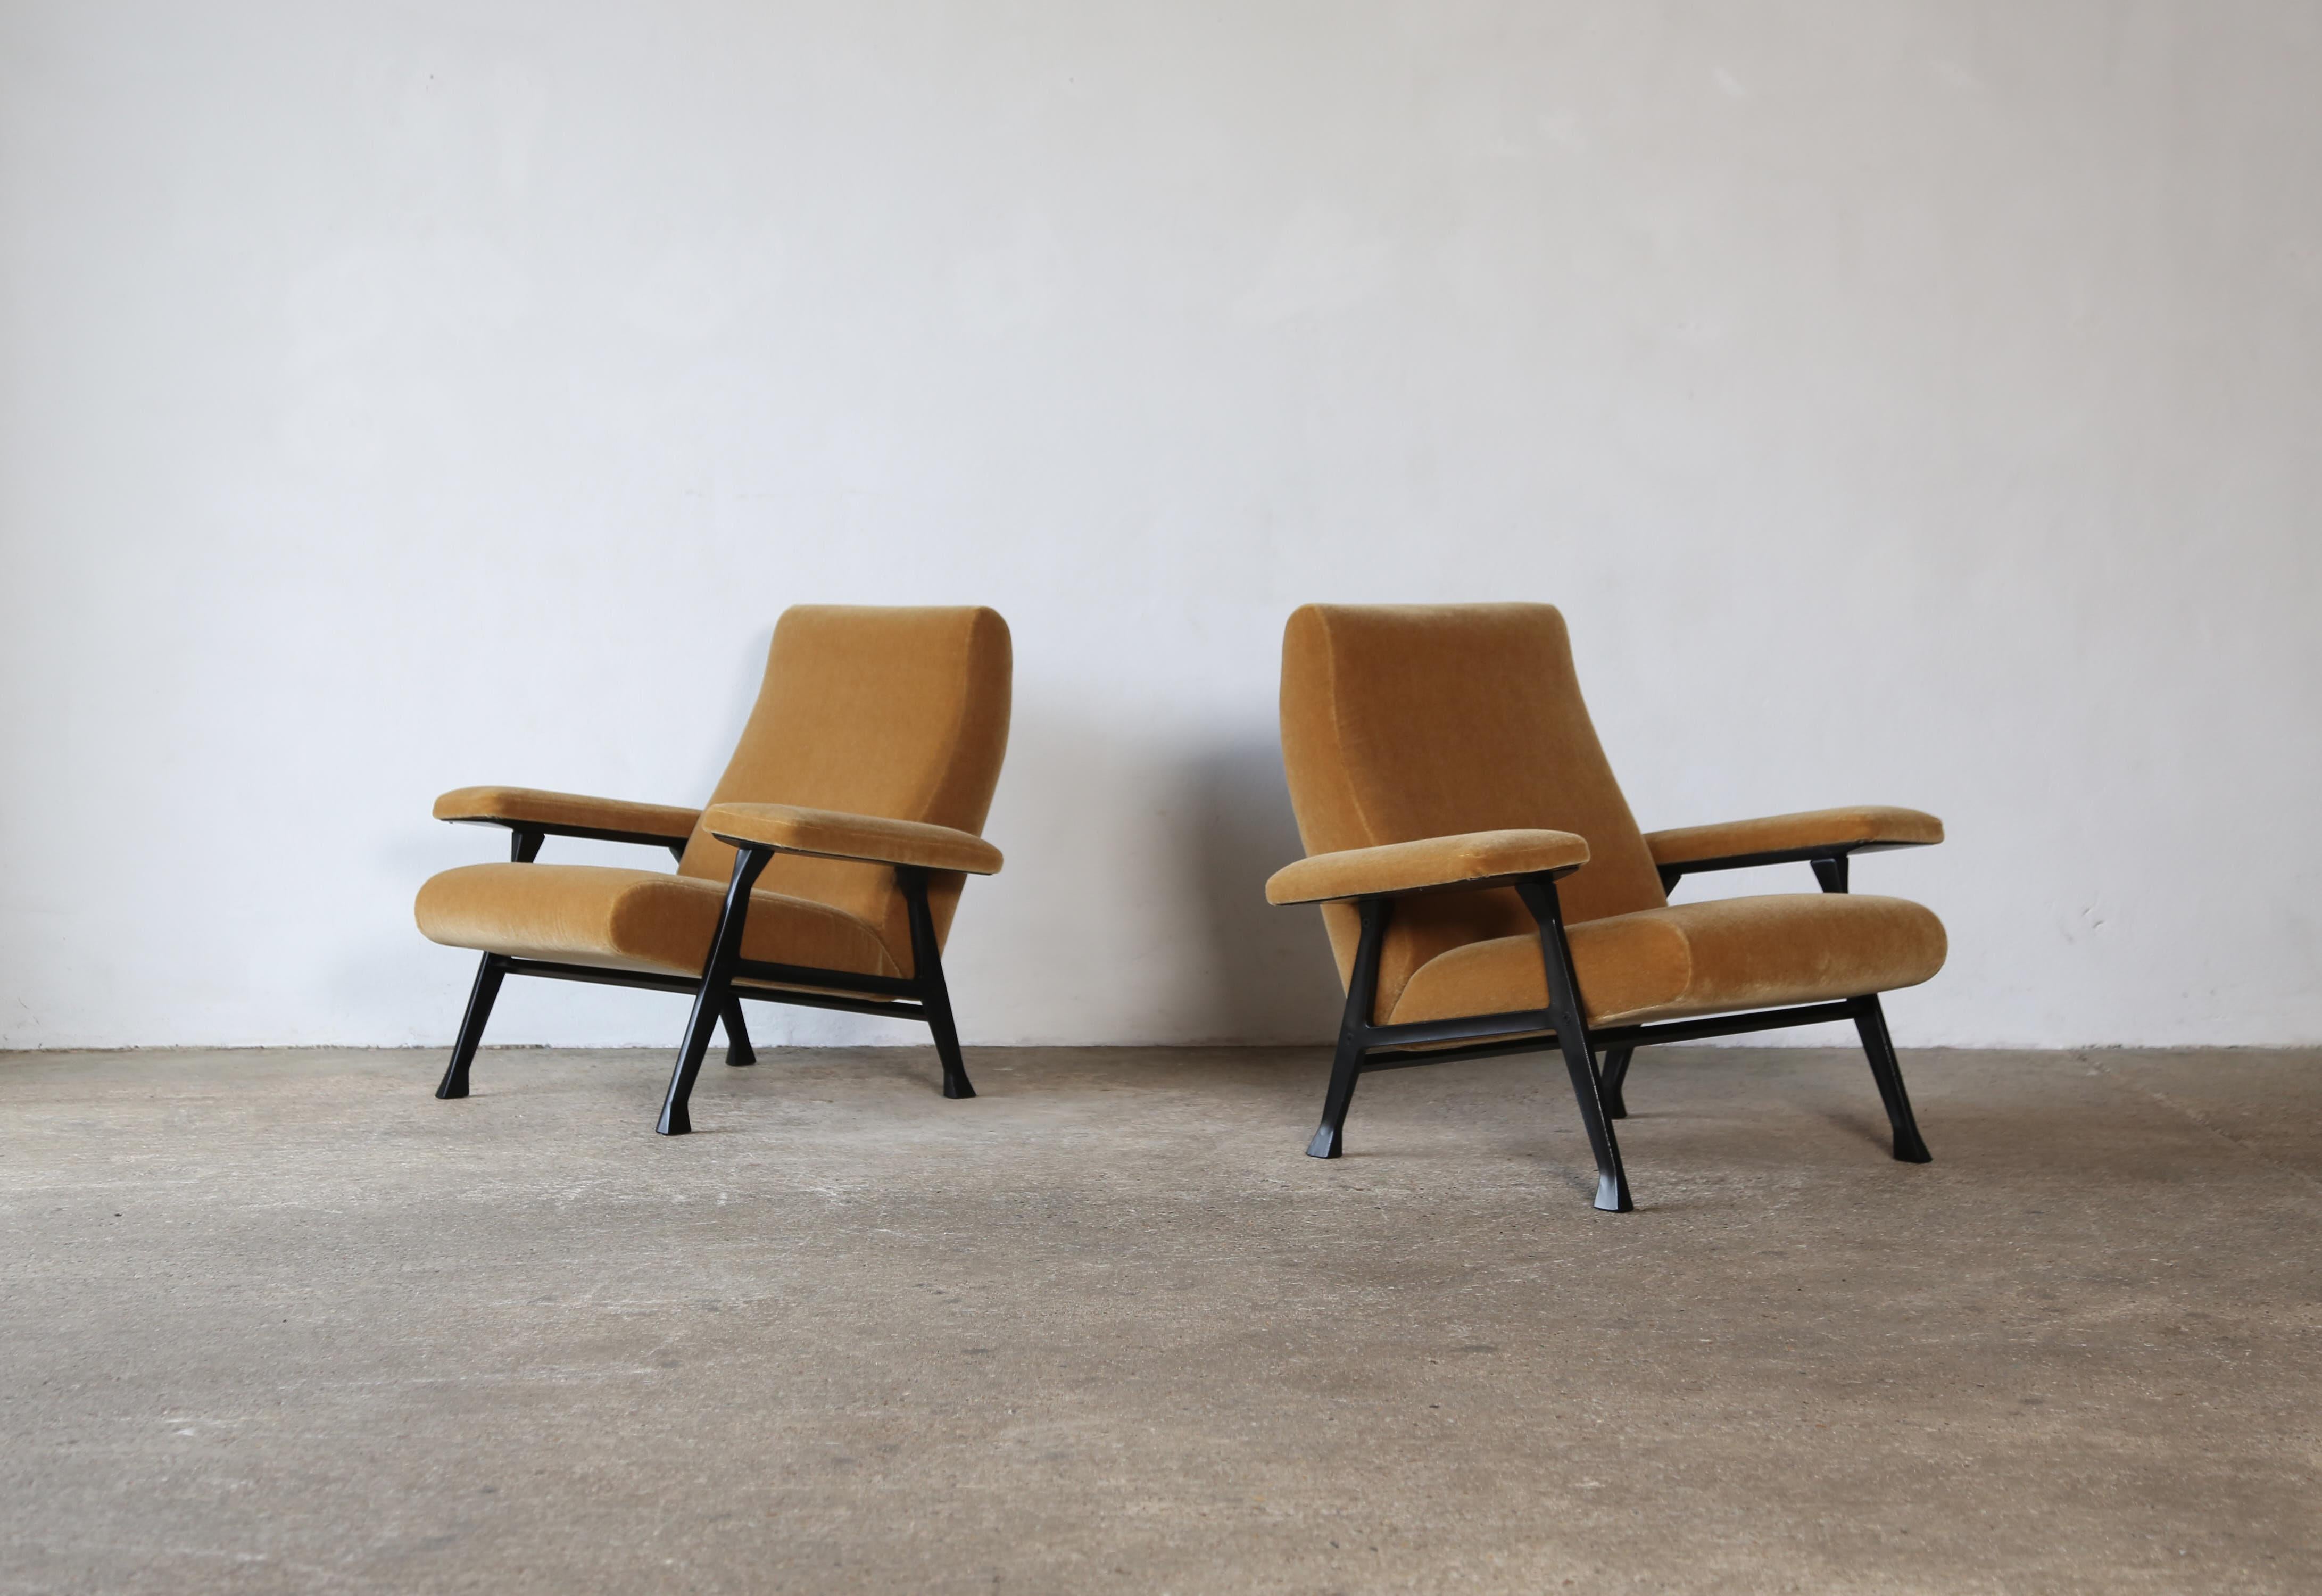 An original pair of Roberto Menghi Hall chairs, produced by Arflex, Italy, 1950s. Newly upholstered in a premium yellow gold pure mohair fabric.  The metal frames have been restored and repainted. These chairs were specified by Gio Ponti for his